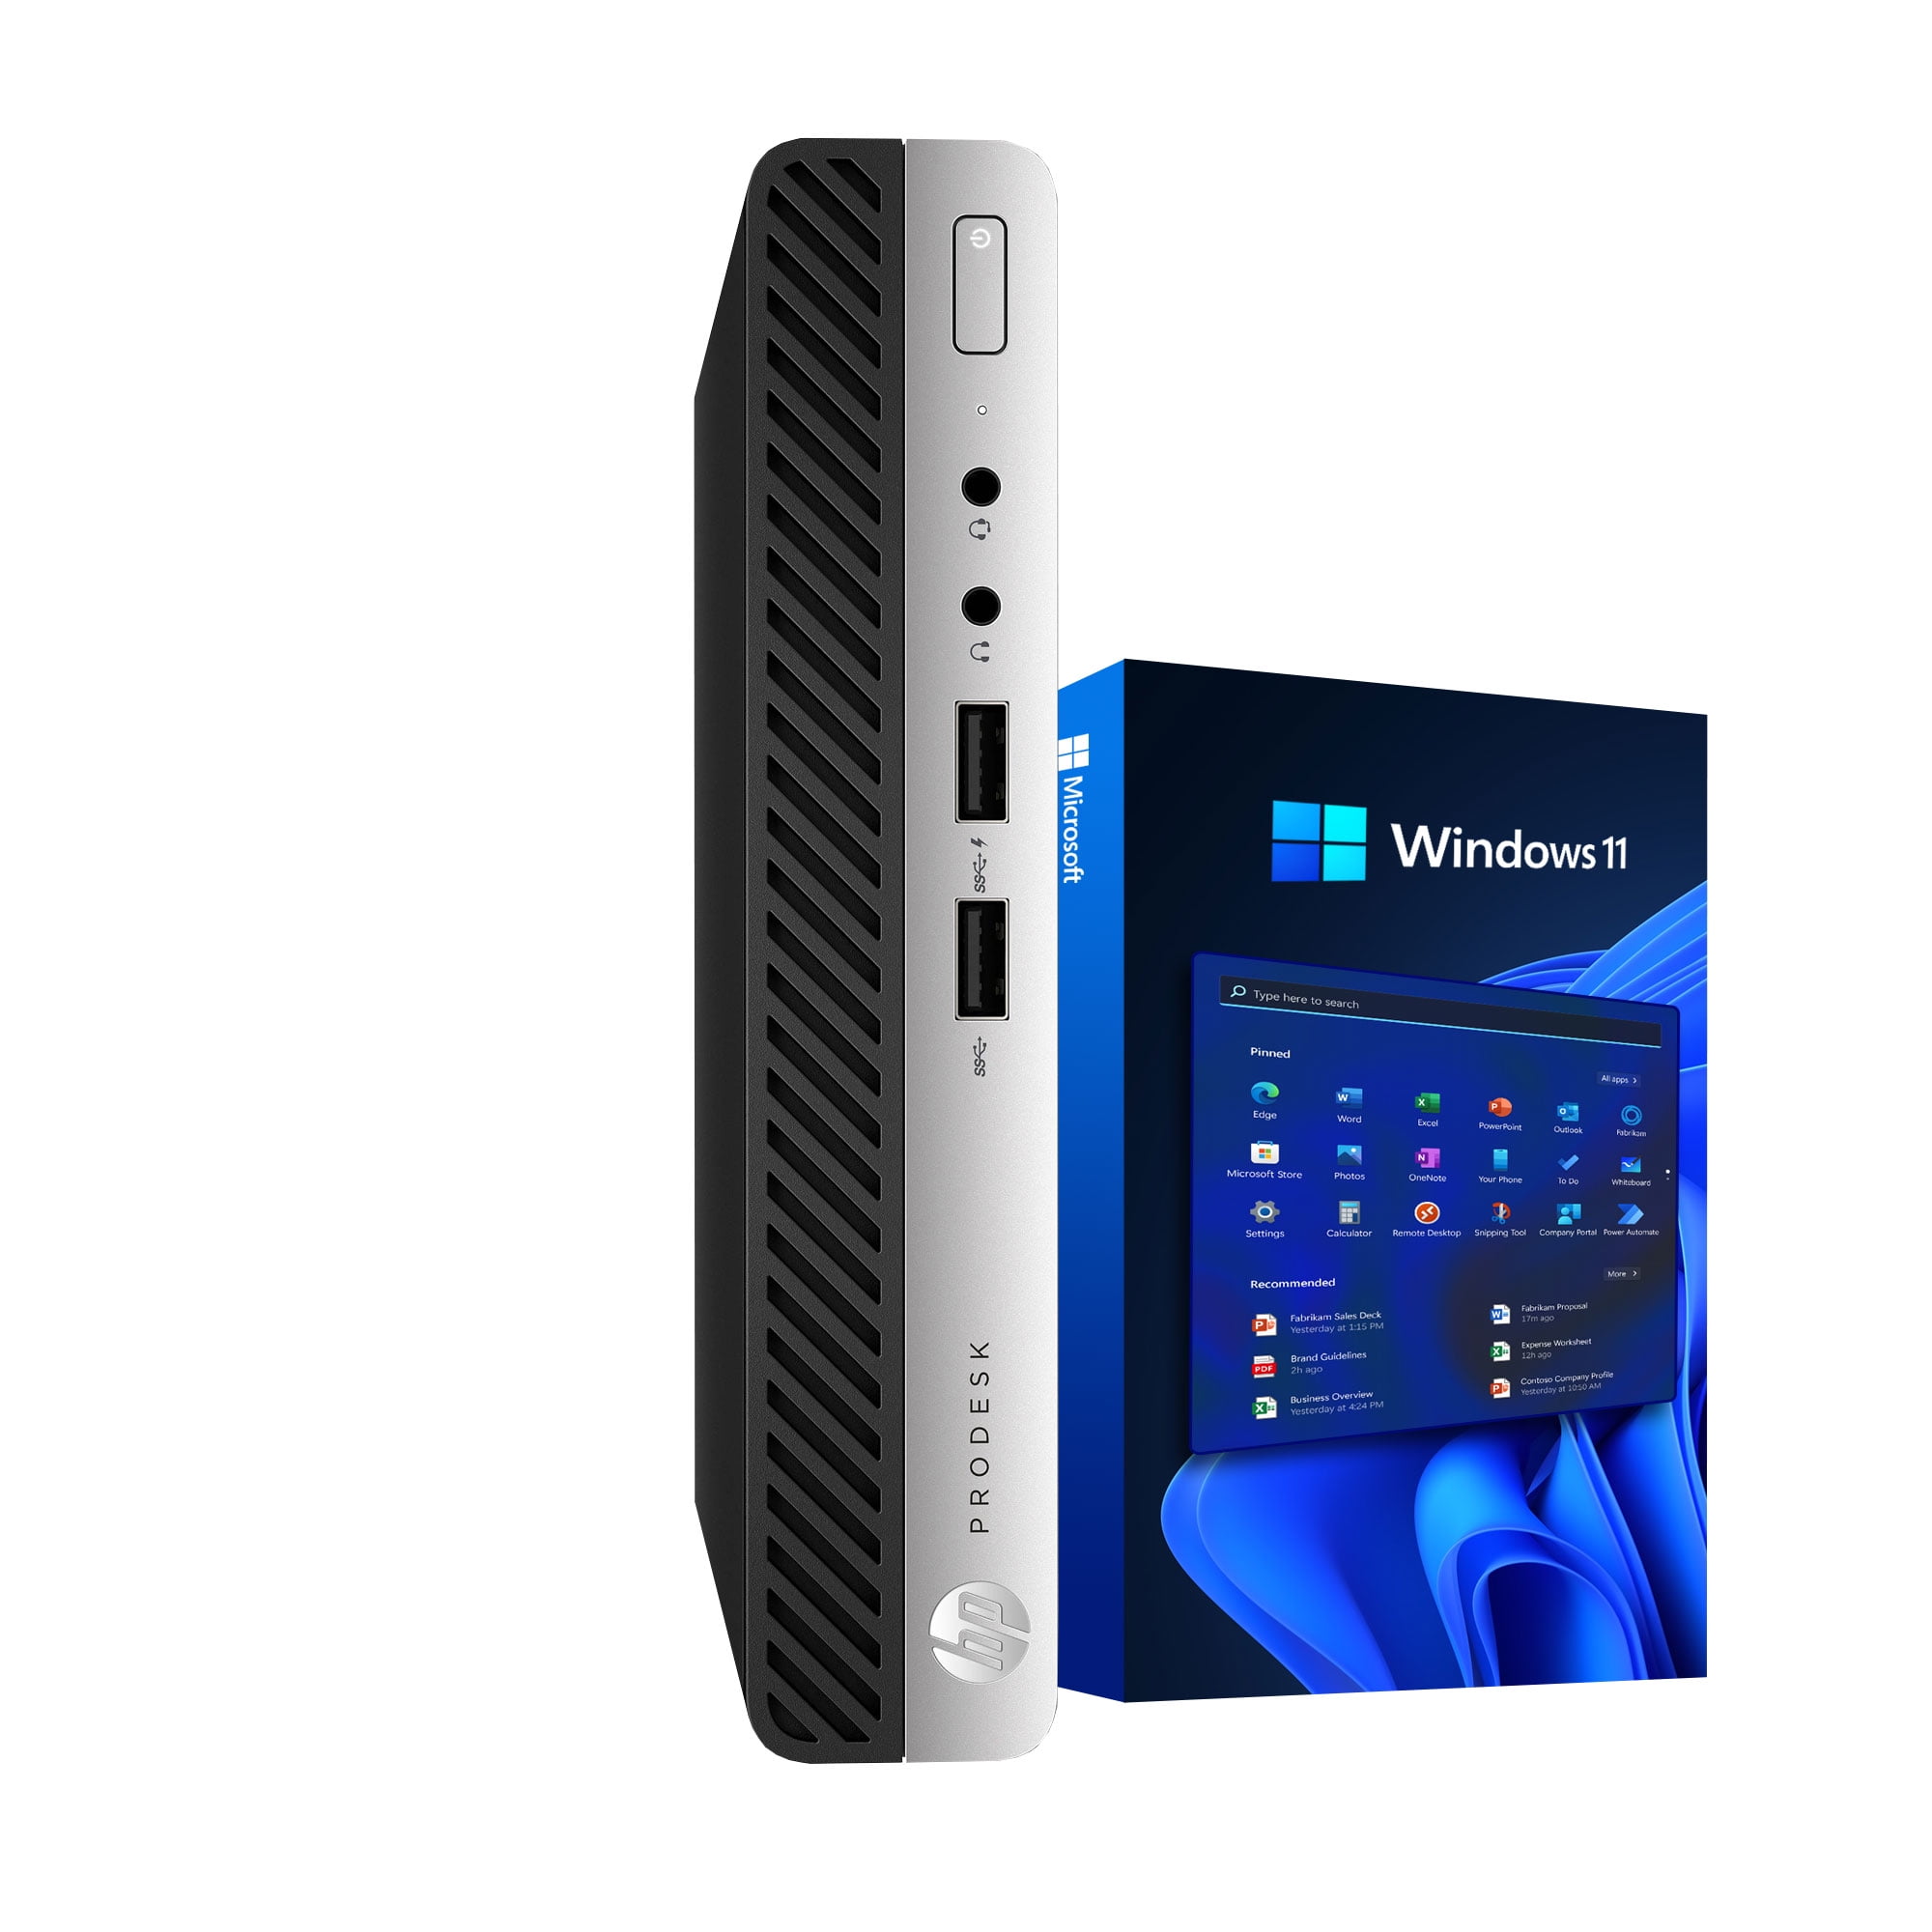 Pensioneret Uhyggelig Nævne HP ProDesk 400G4 - Windows 11 Mini Desktop Computer PC | Intel Core  i5-8500T Six Core (4.3GHz Turbo) | 16GB DDR4 RAM | 500GB SSD Solid State +  1TB HDD | WiFi +